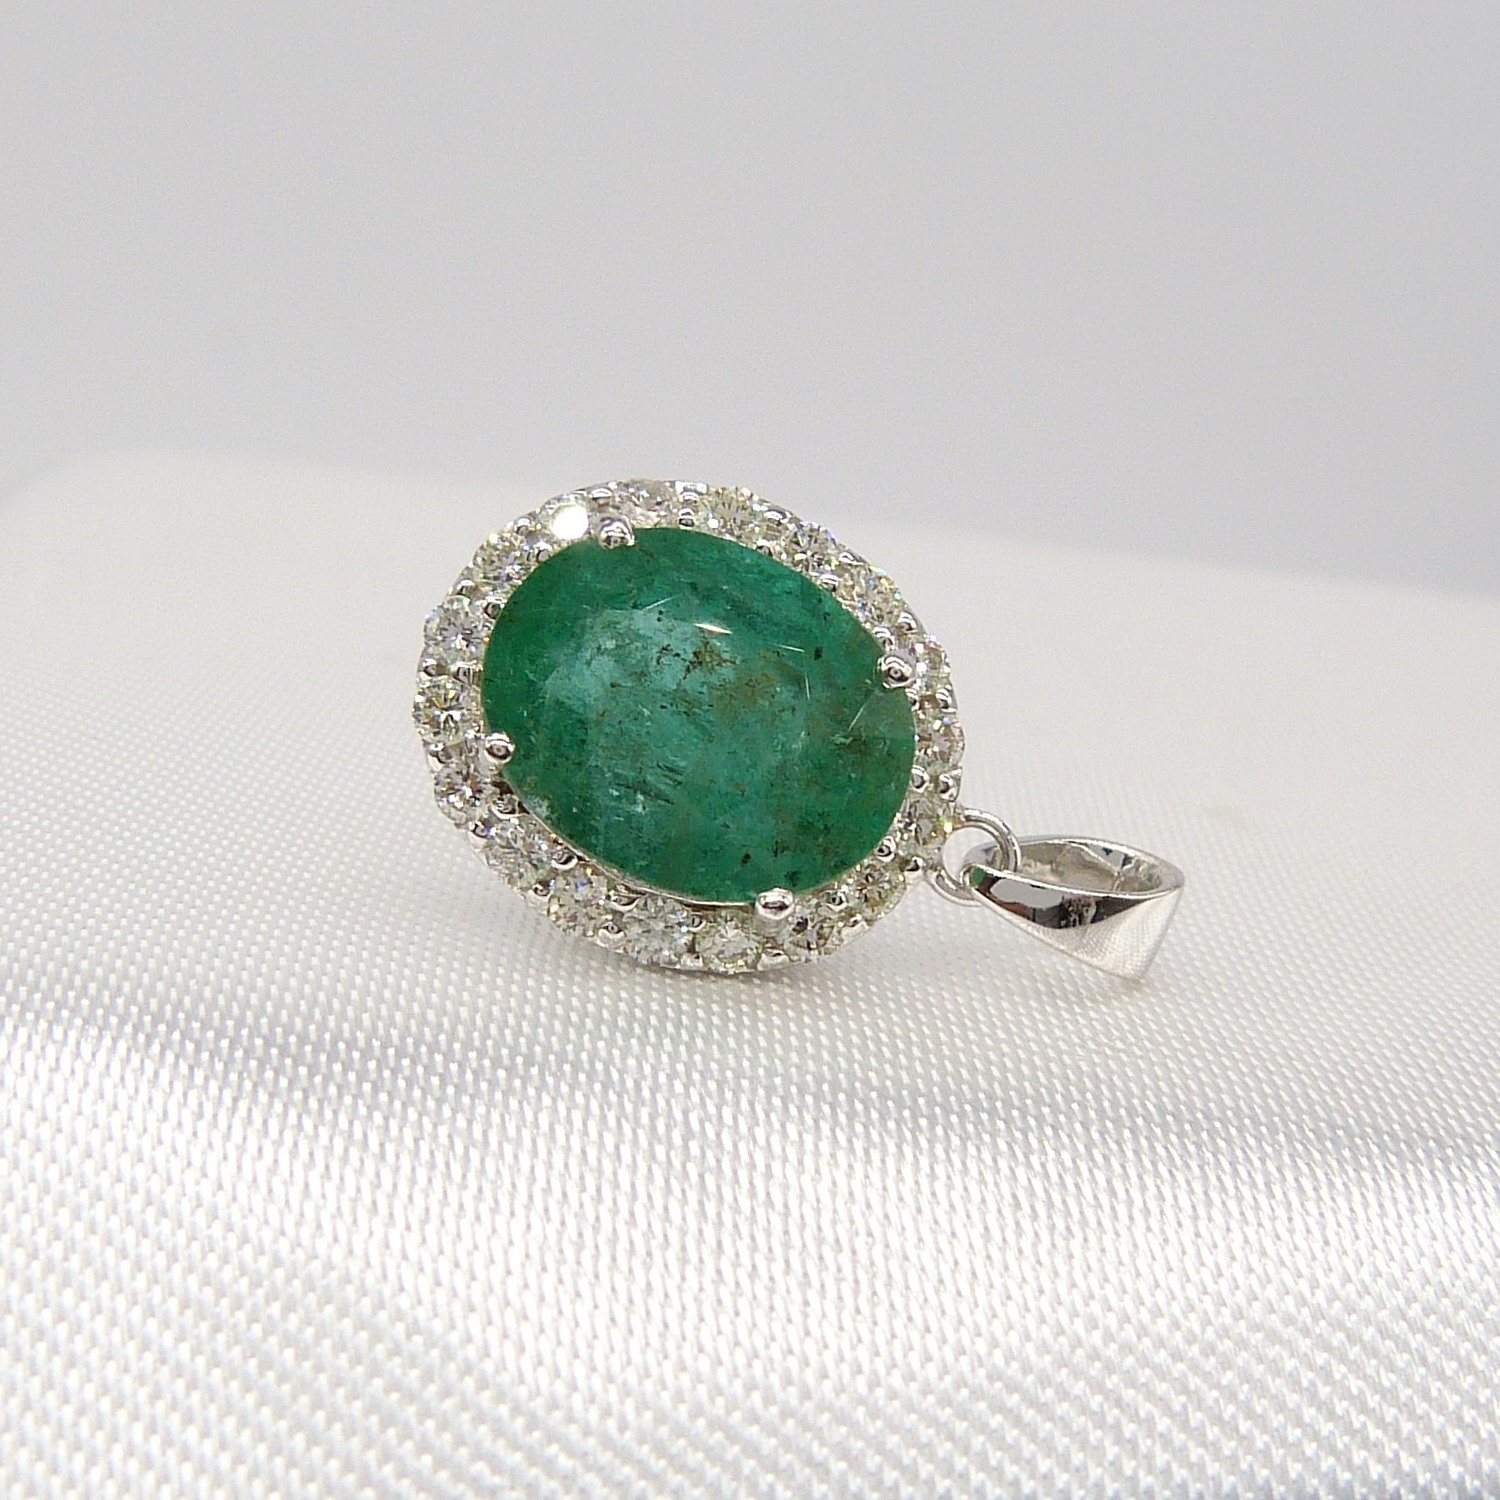 A large emerald and diamond halo pendant in 18ct white gold - Image 4 of 7